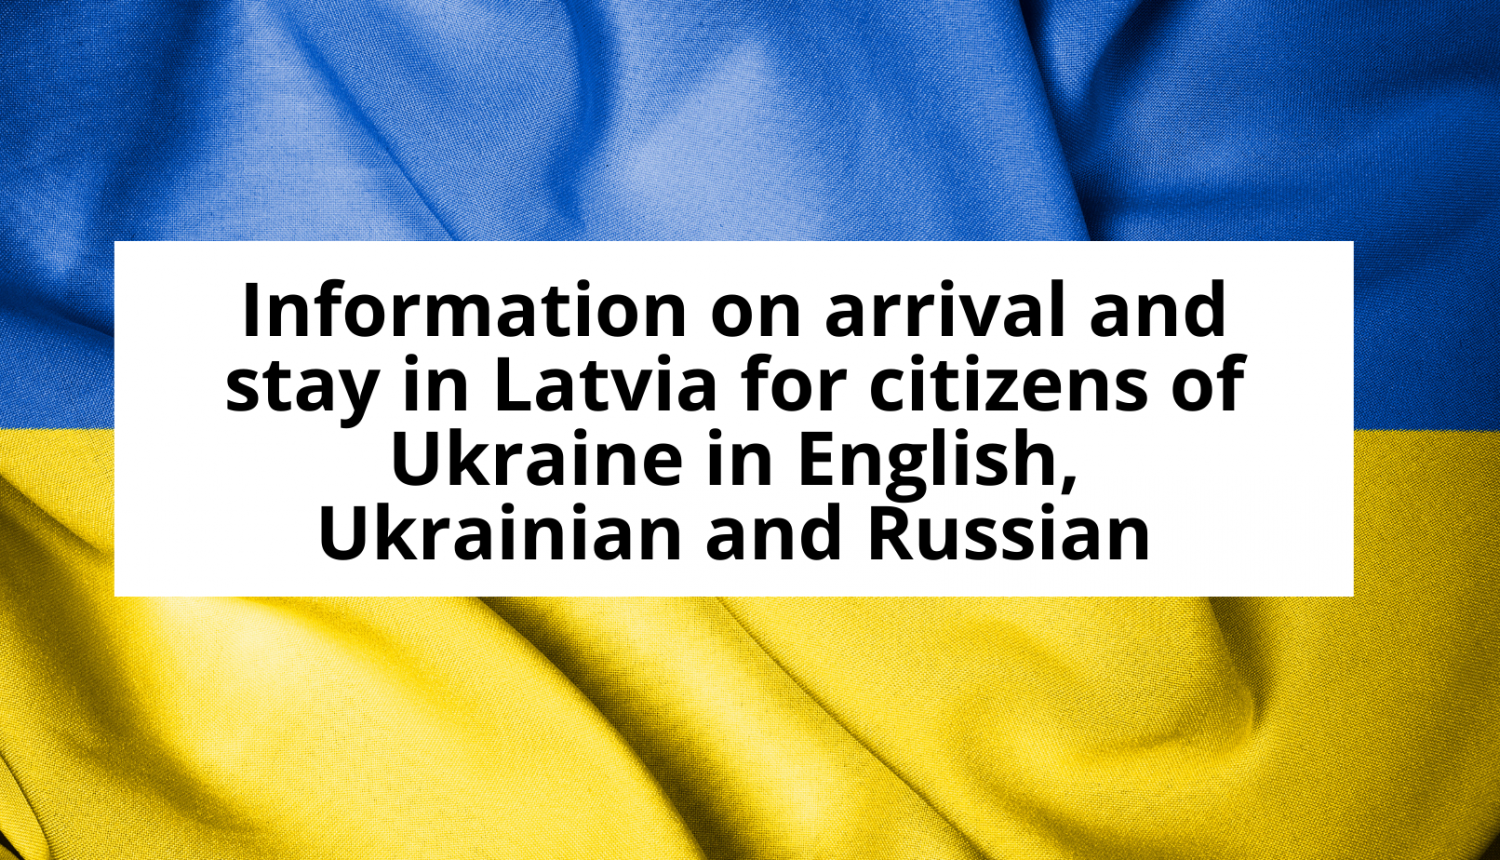 Information on arrival and stay in Latvia